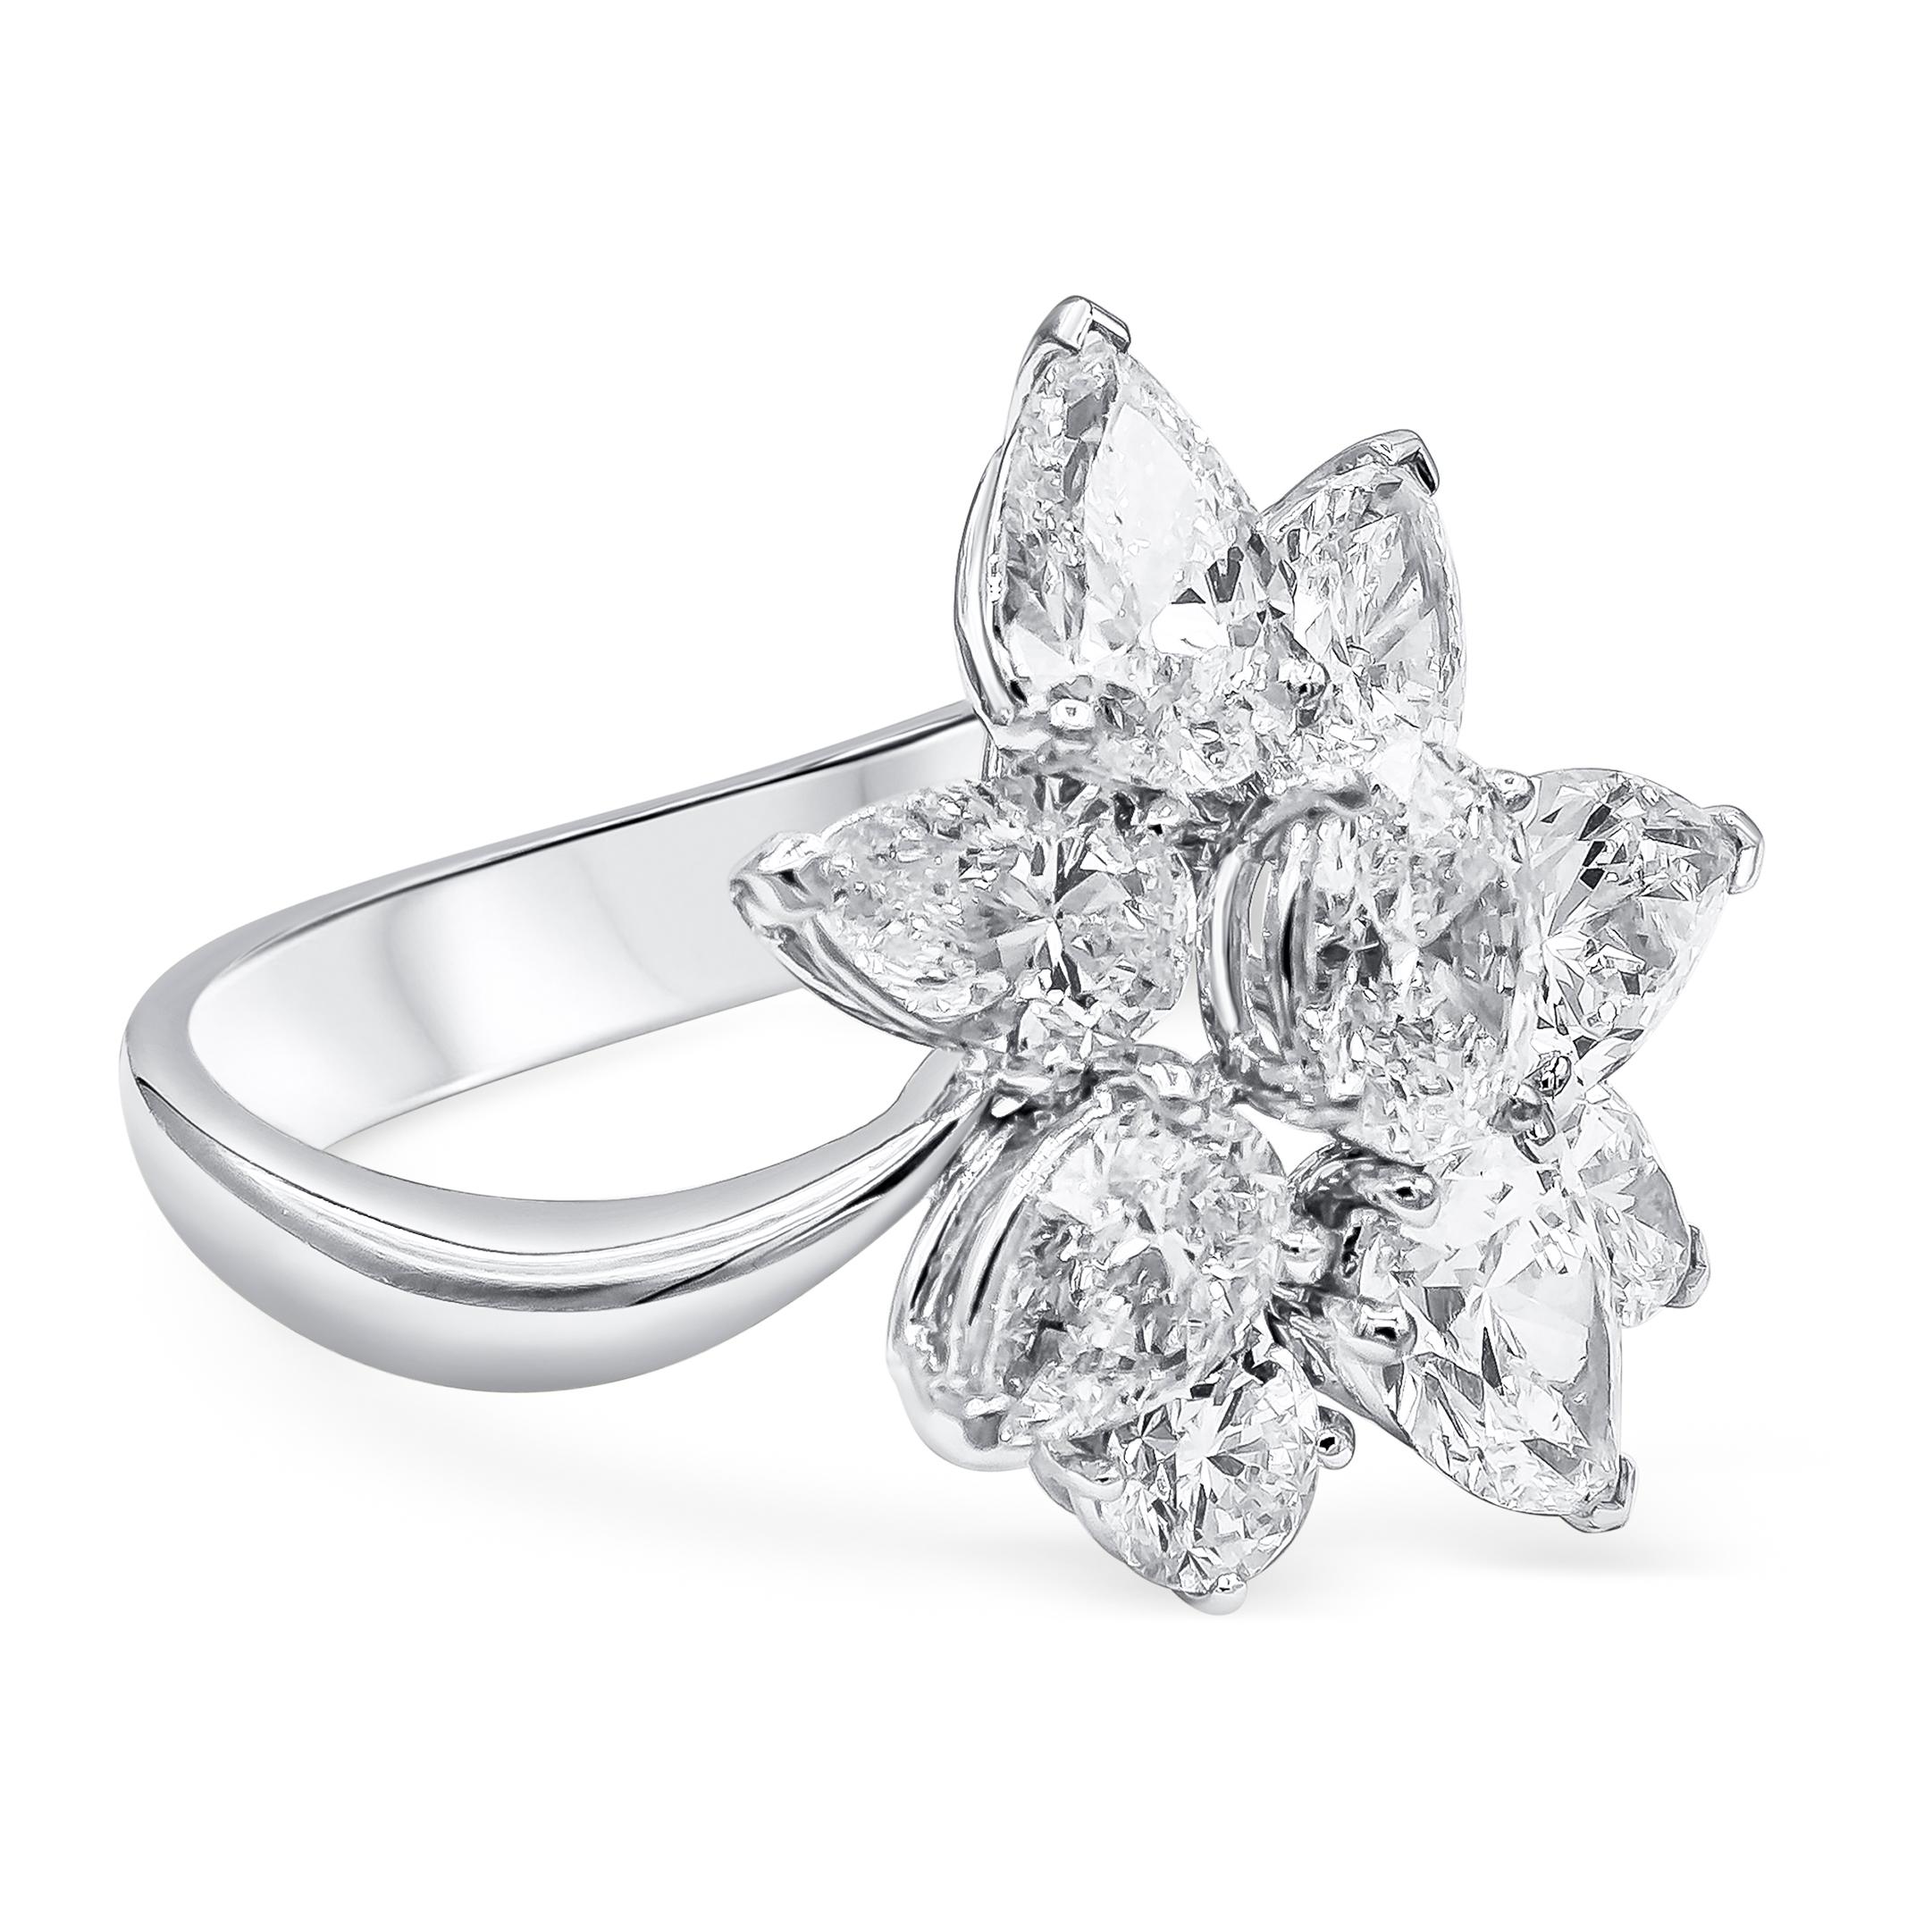 A beautiful fashion ring showcasing a cluster of mix cut diamonds weighing 4.66 carats total, D-F color and VS-SI1 in clarity. Set in a floral-motif design. Set and mounted on a curved band made in 18K White Gold. Size 6 US resizable upon